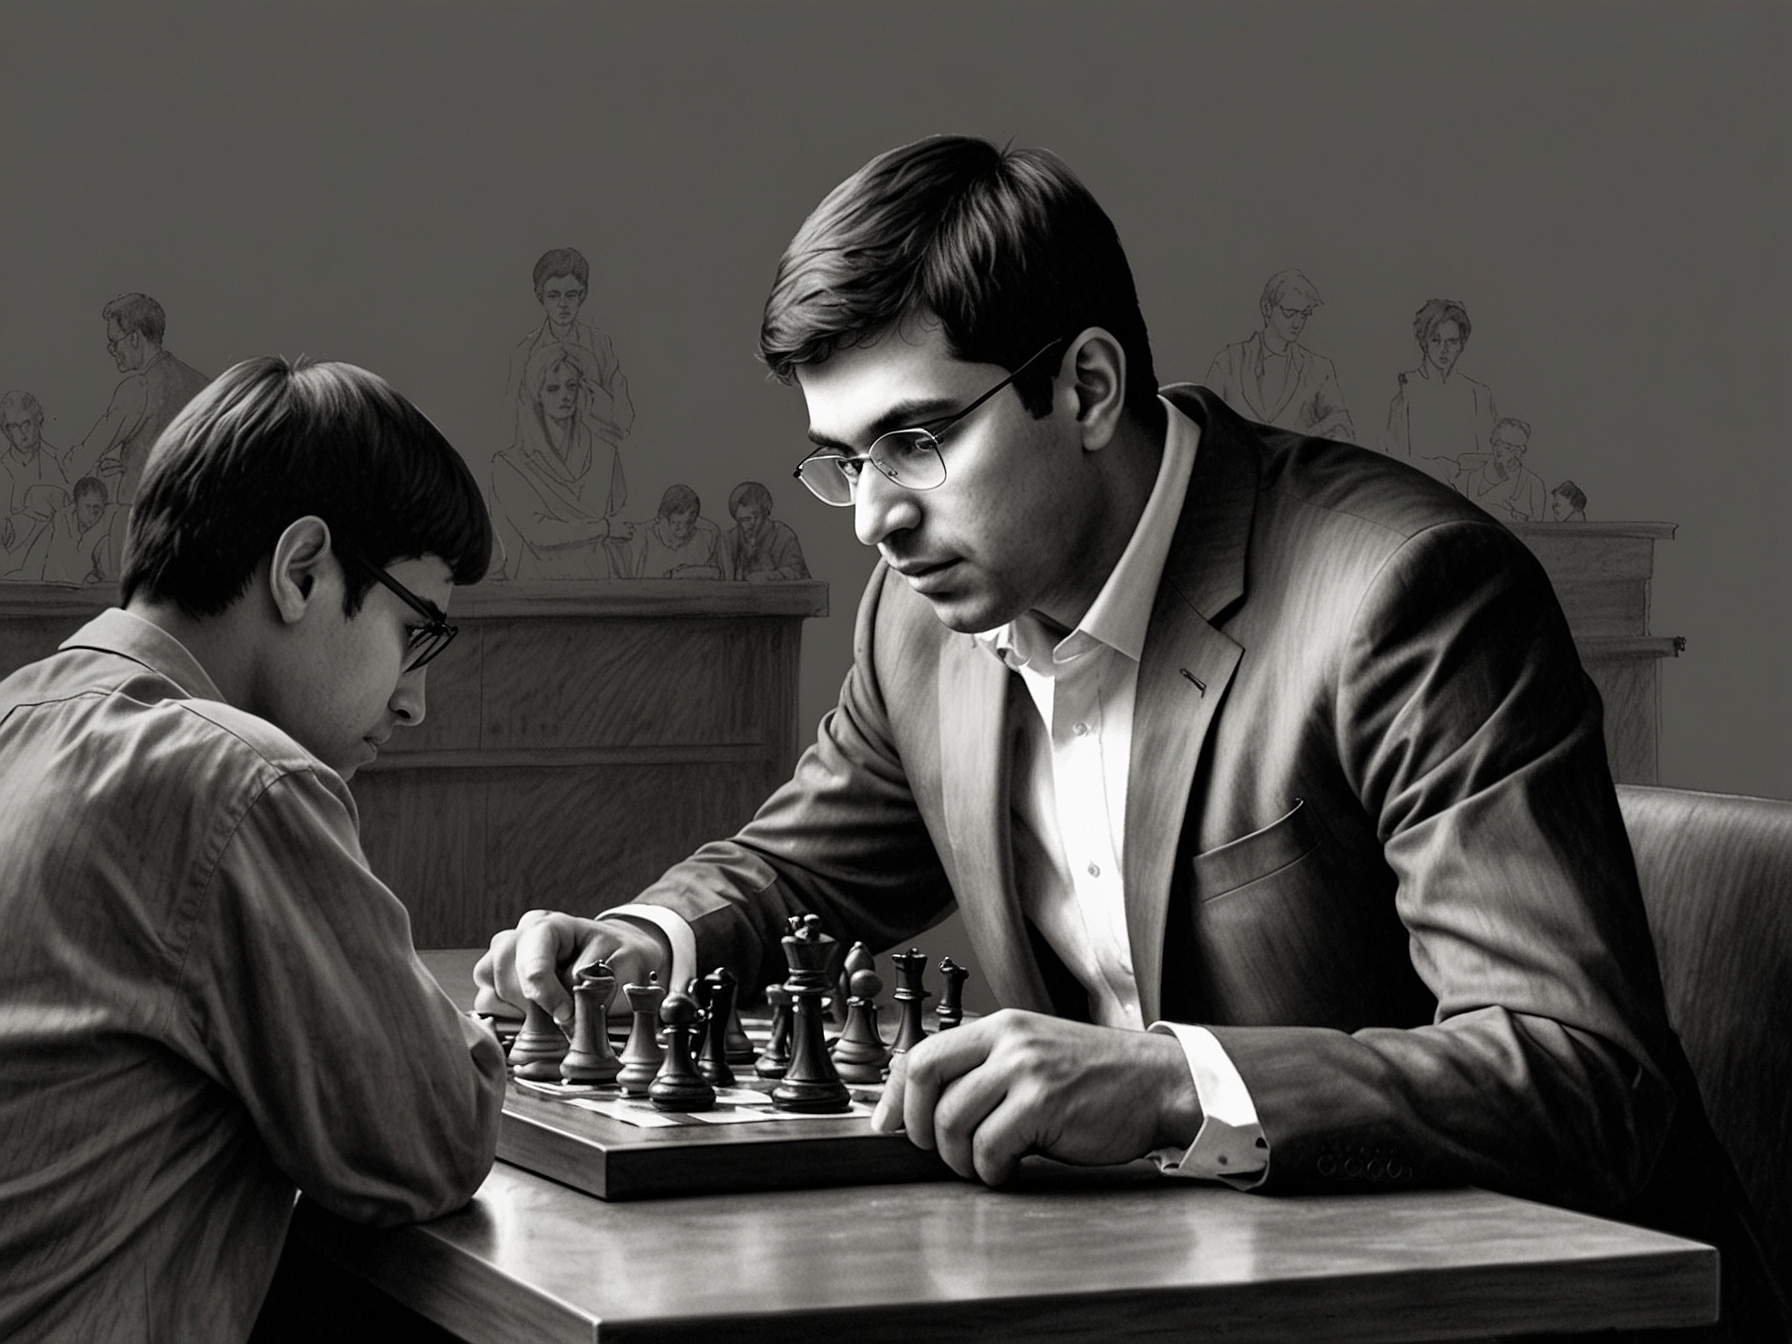 Viswanathan Anand playing chess against a young opponent, symbolizing his role as a mentor and inspiration for the next generation of chess players in India and Asia.